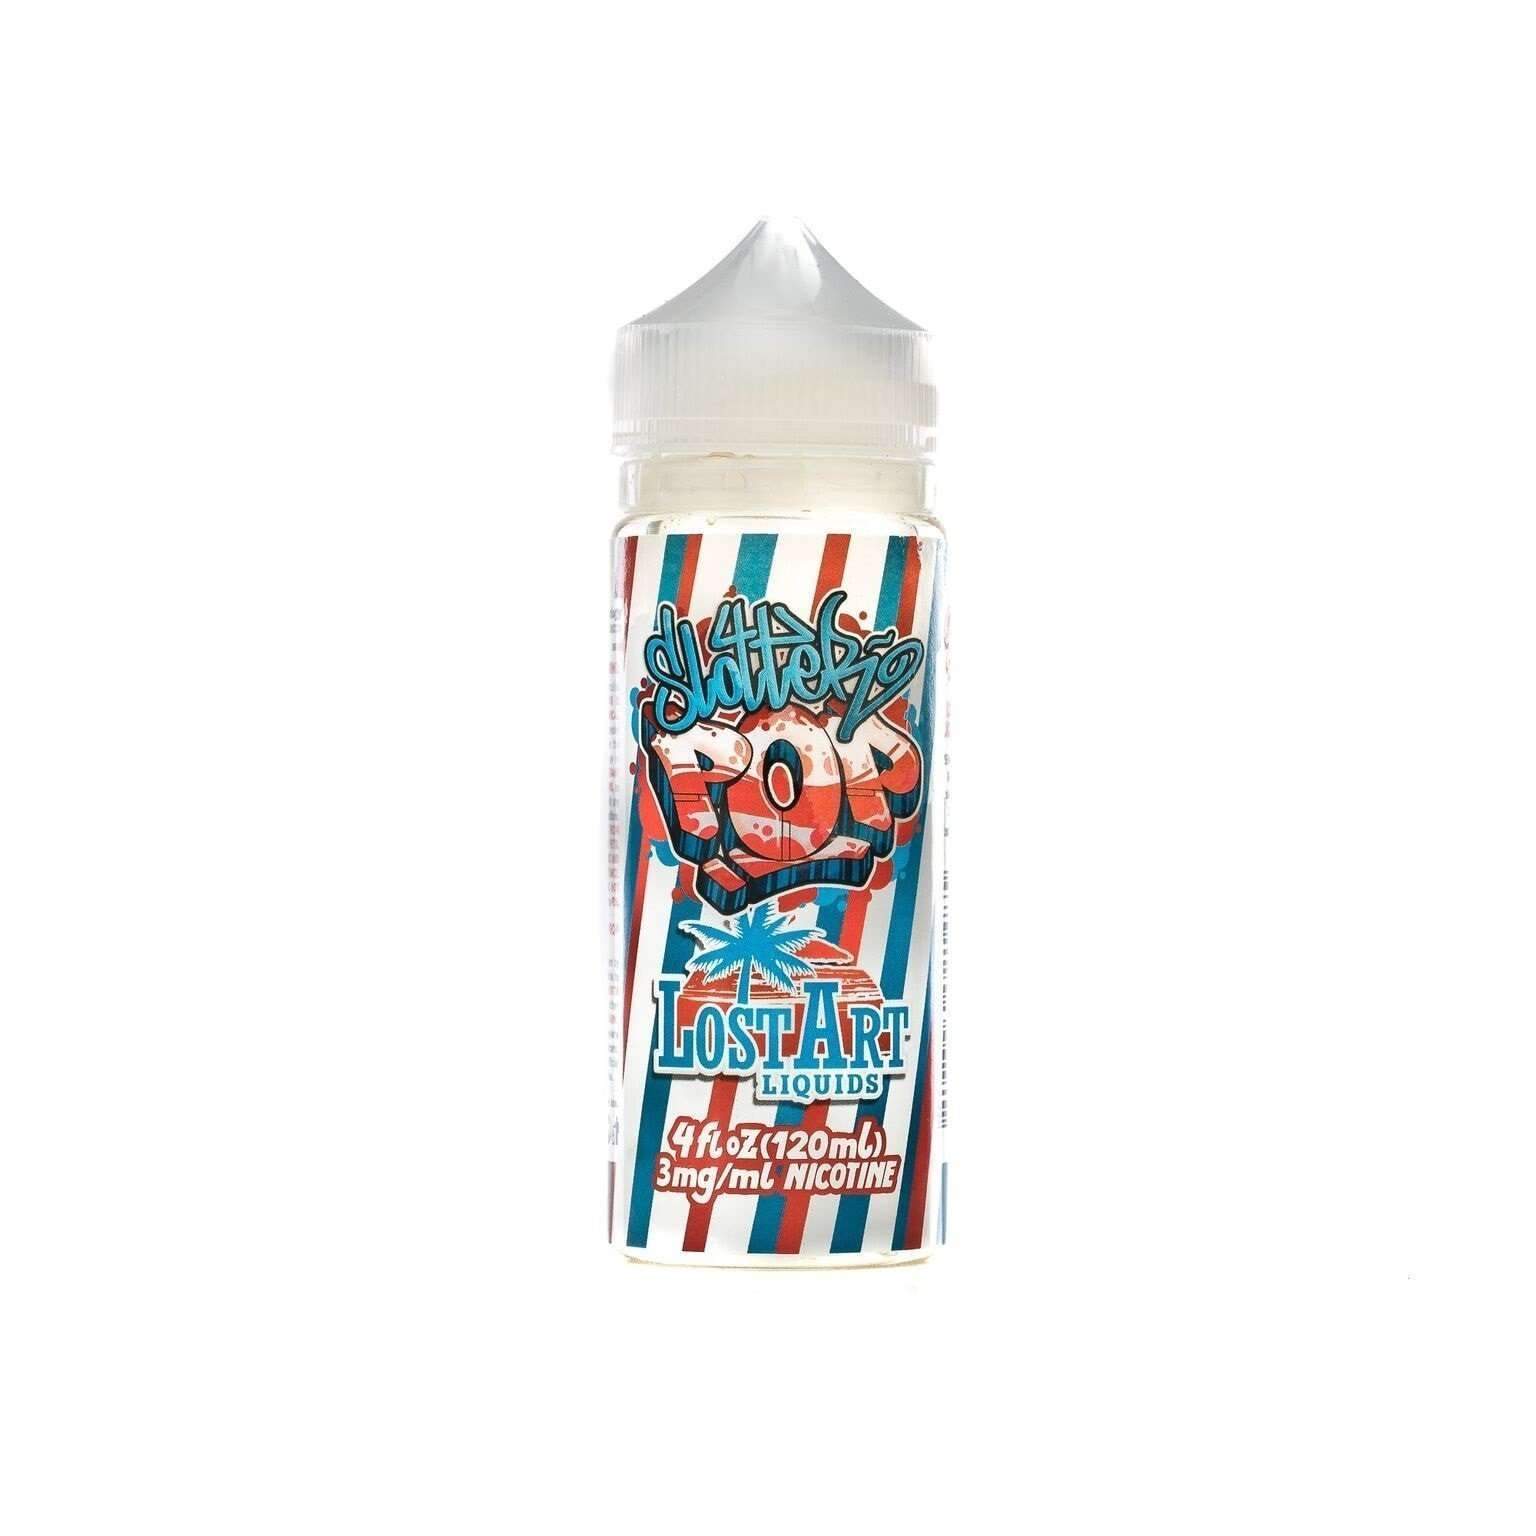 Slotter Pops Ejuice by Lost Art 120ml